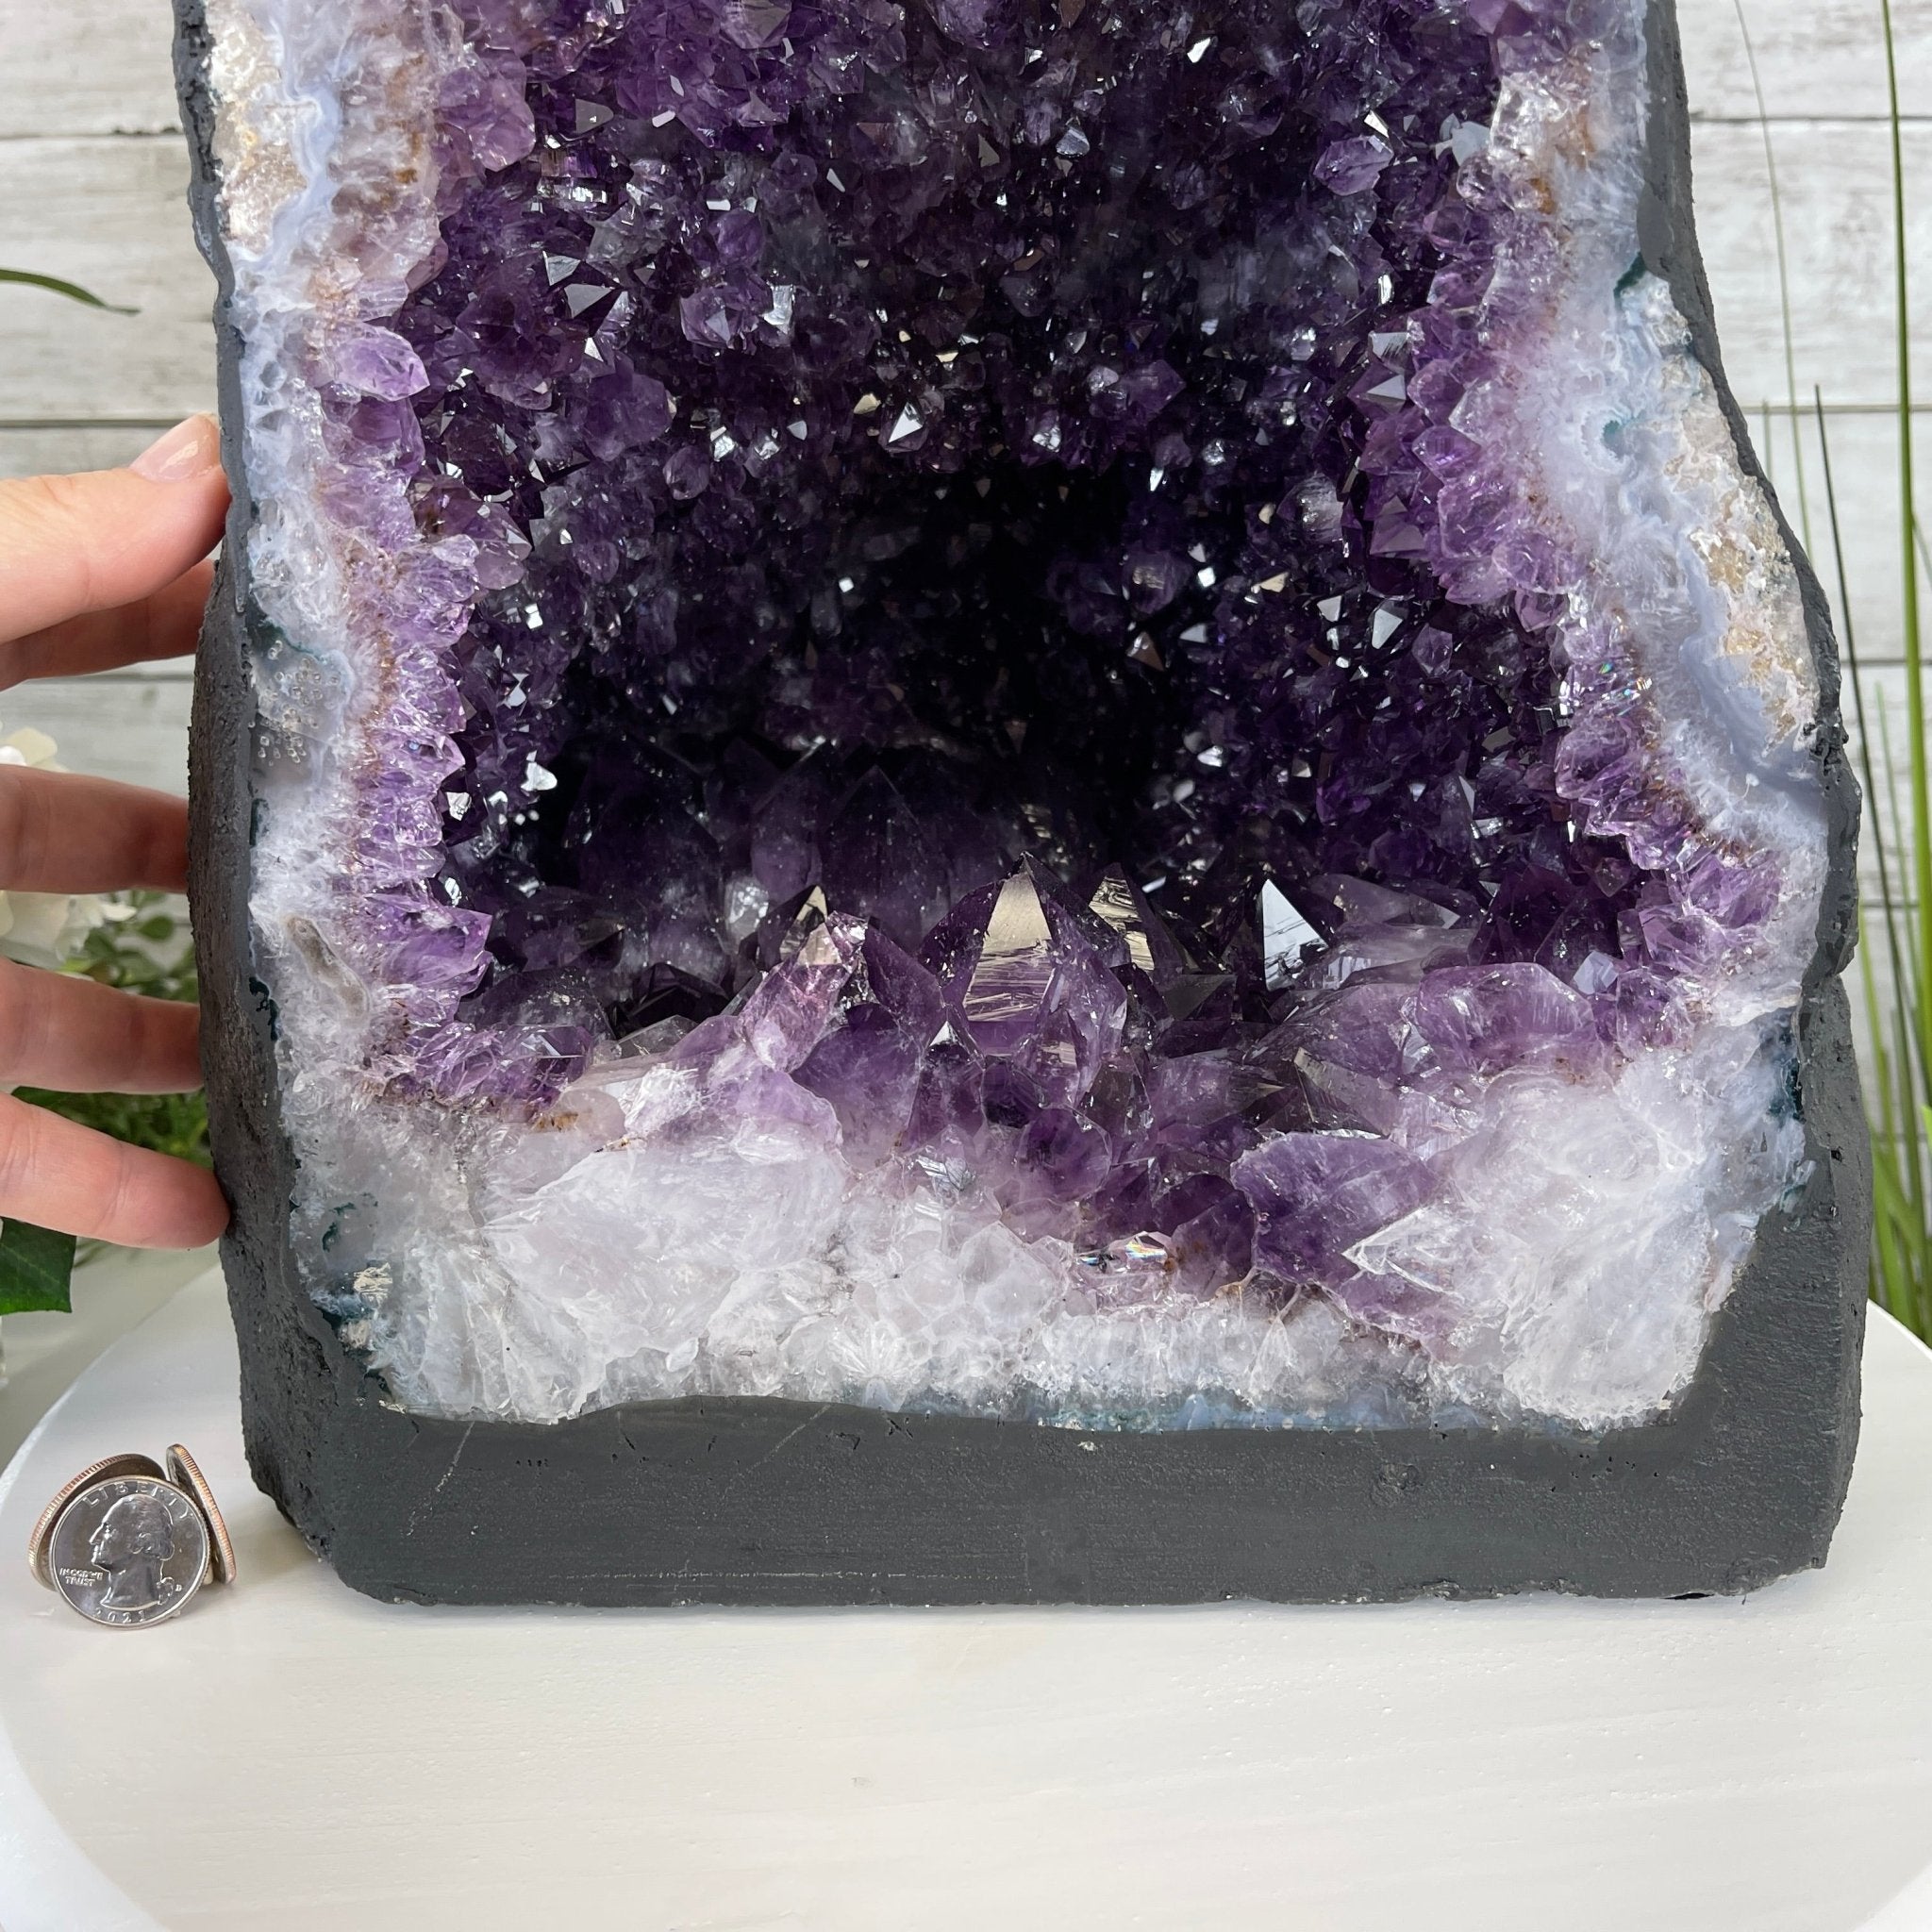 Extra Quality Brazilian Amethyst Cathedral, 17.5” tall & 62.4 lbs #5601-0643 by Brazil Gems - Brazil GemsBrazil GemsExtra Quality Brazilian Amethyst Cathedral, 17.5” tall & 62.4 lbs #5601-0643 by Brazil GemsCathedrals5601-0643